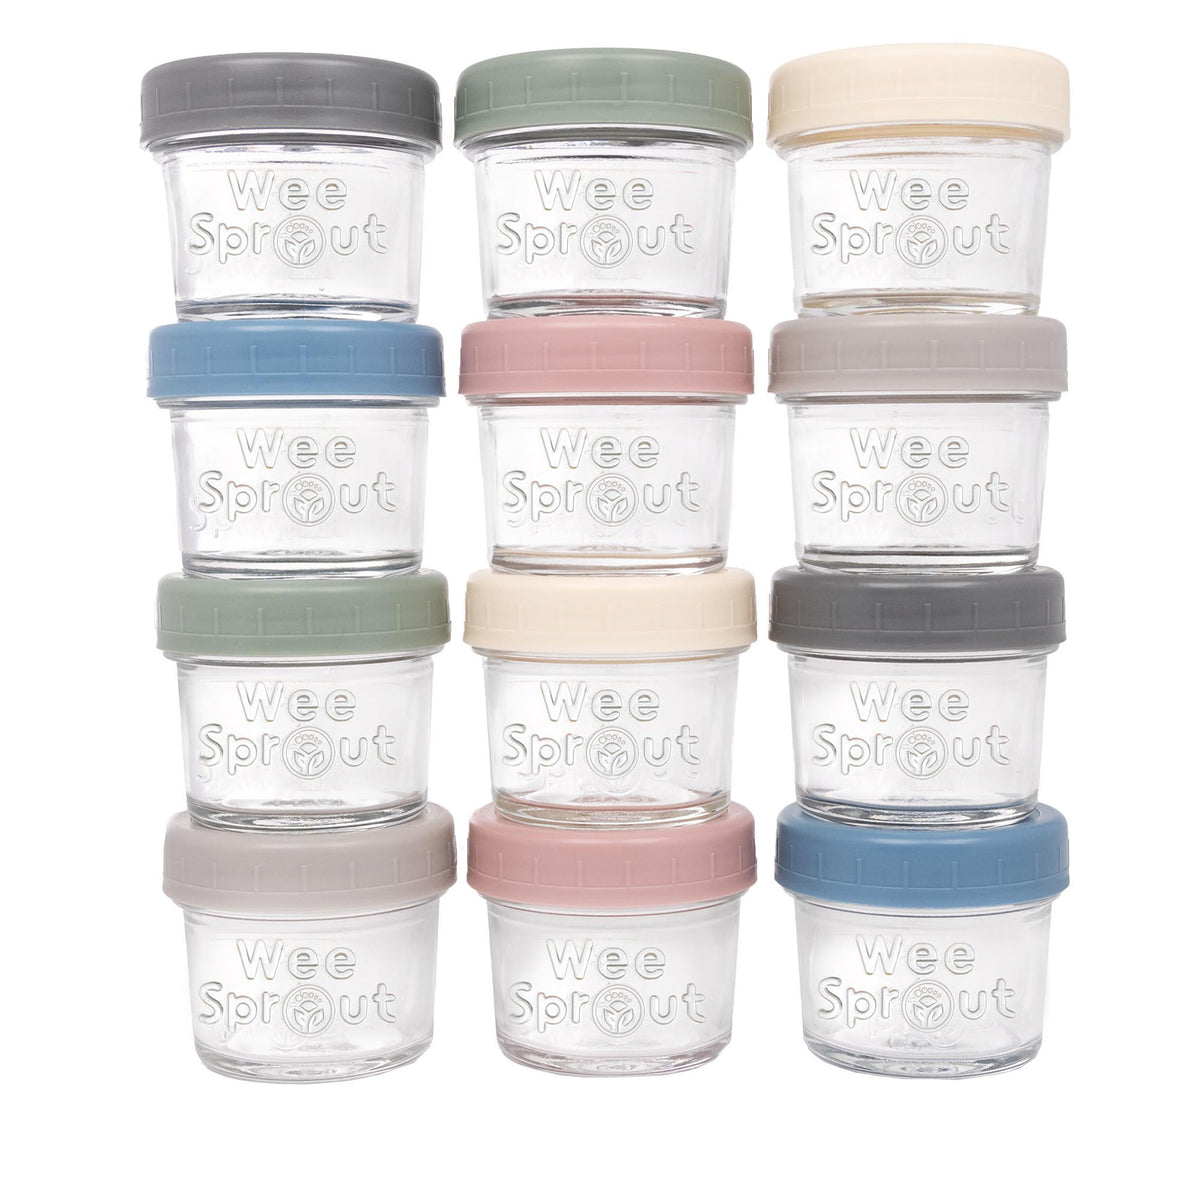  WeeSprout Glass Storage Jars 2022 (4 Ounce, 8 Ounce, Matte  Variety) : Baby